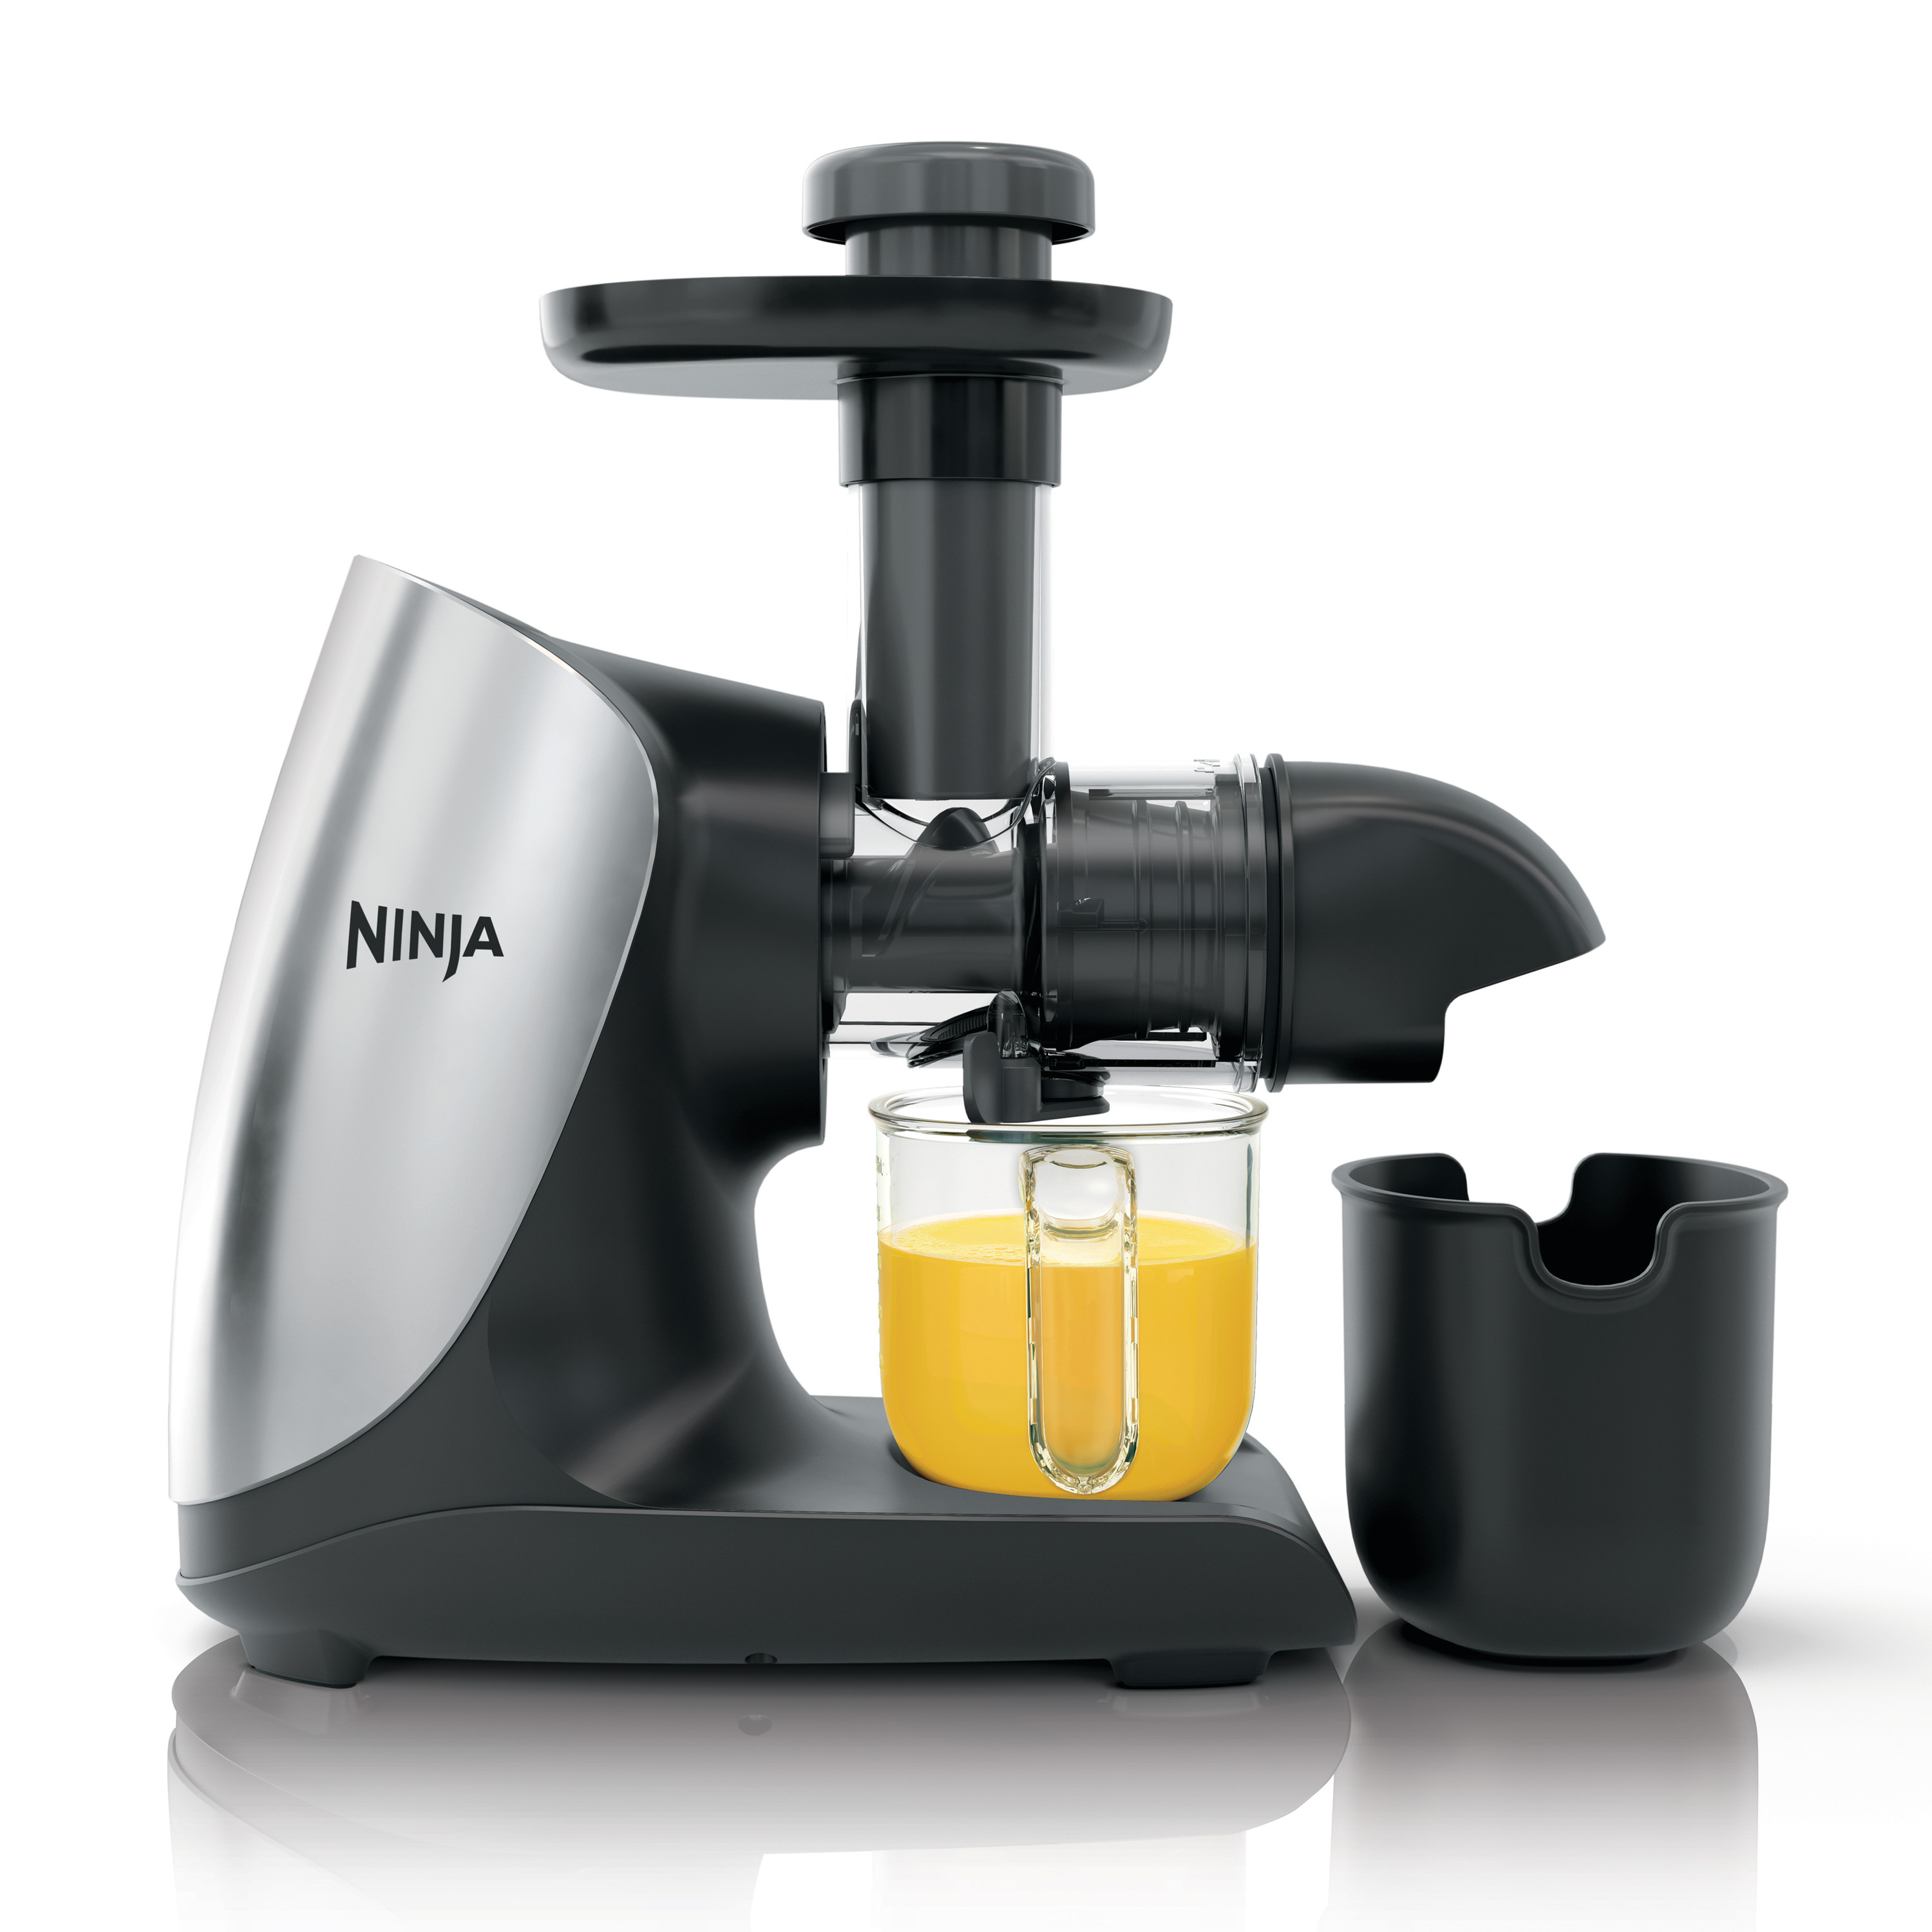 Ninja® Cold Press Juicer Pro - Powerful Slow Juicer with Total Pulp Control - Cloud Silver, JC100 - image 1 of 13